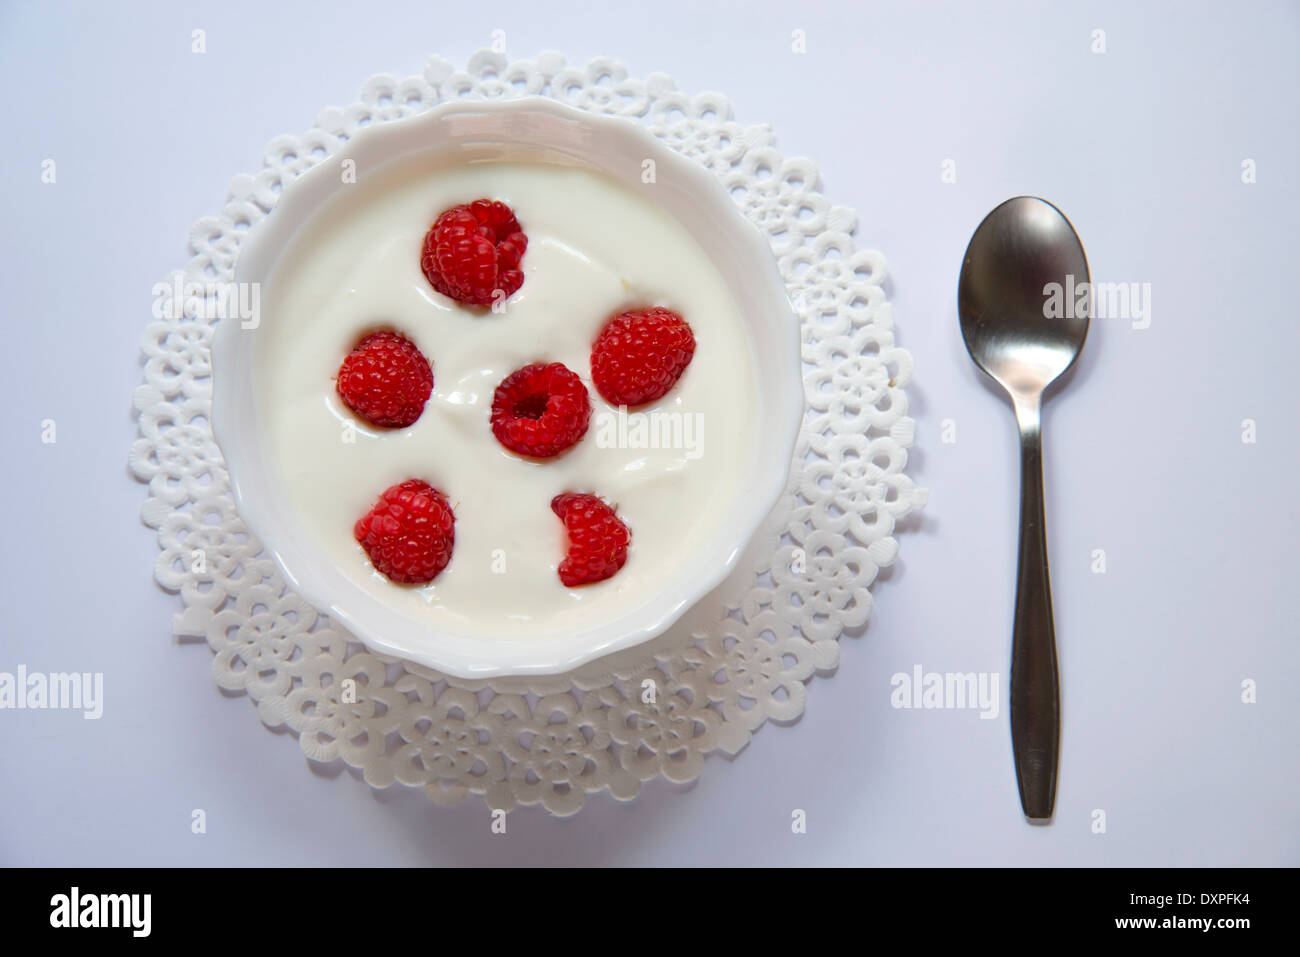 Cream with raspberries, view from above. Stock Photo